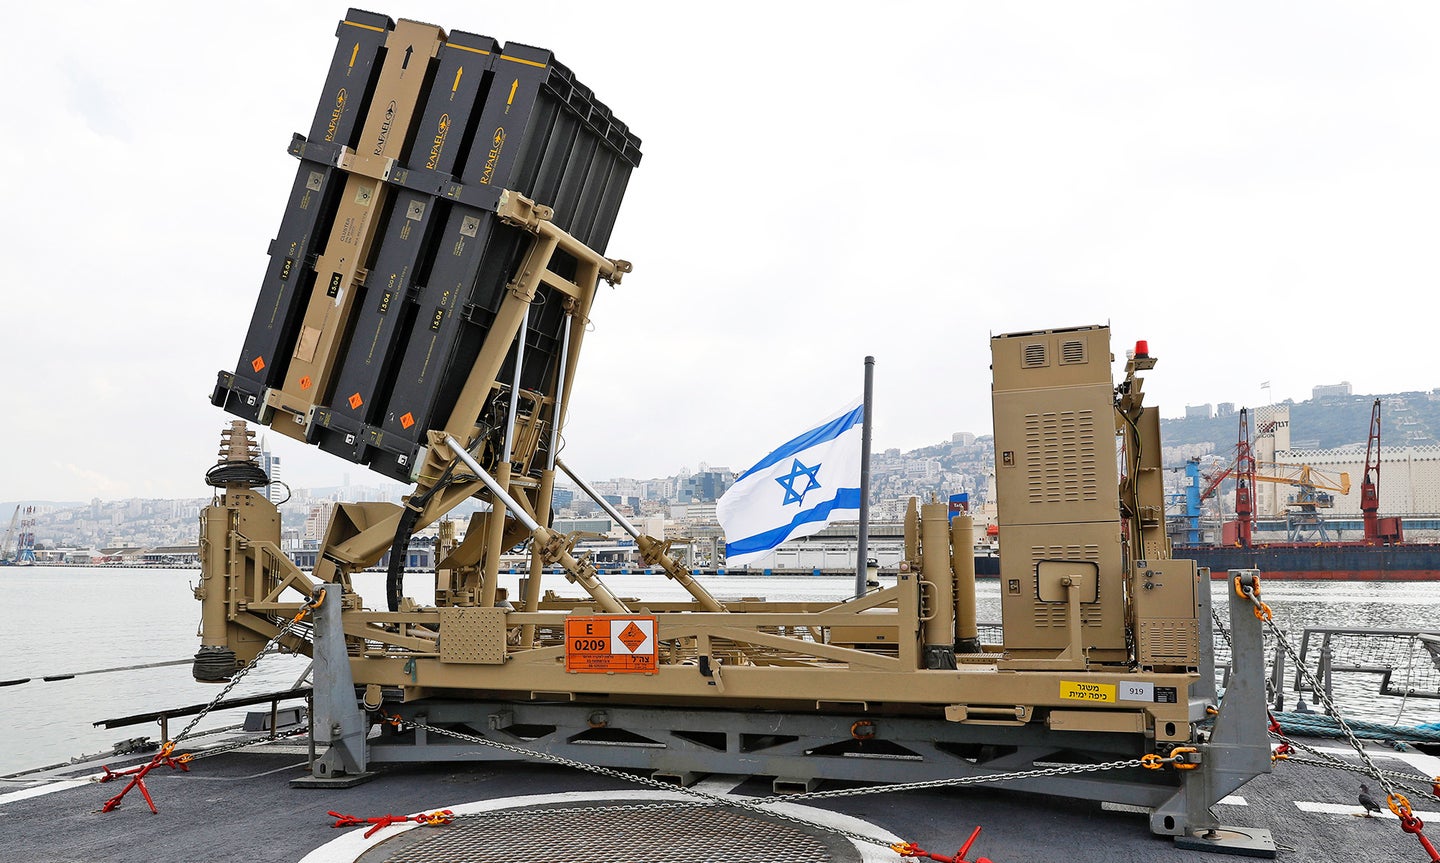 An Iron Dome defence system, installed on a Sa'ar 5 Lahav Class corvette of the Israeli Navy, in the northern port of Haifa, Israel, Feb. 12, 2019. The Iron Dome is designed to intercept and destroy incoming short-range rockets and artillery shells.